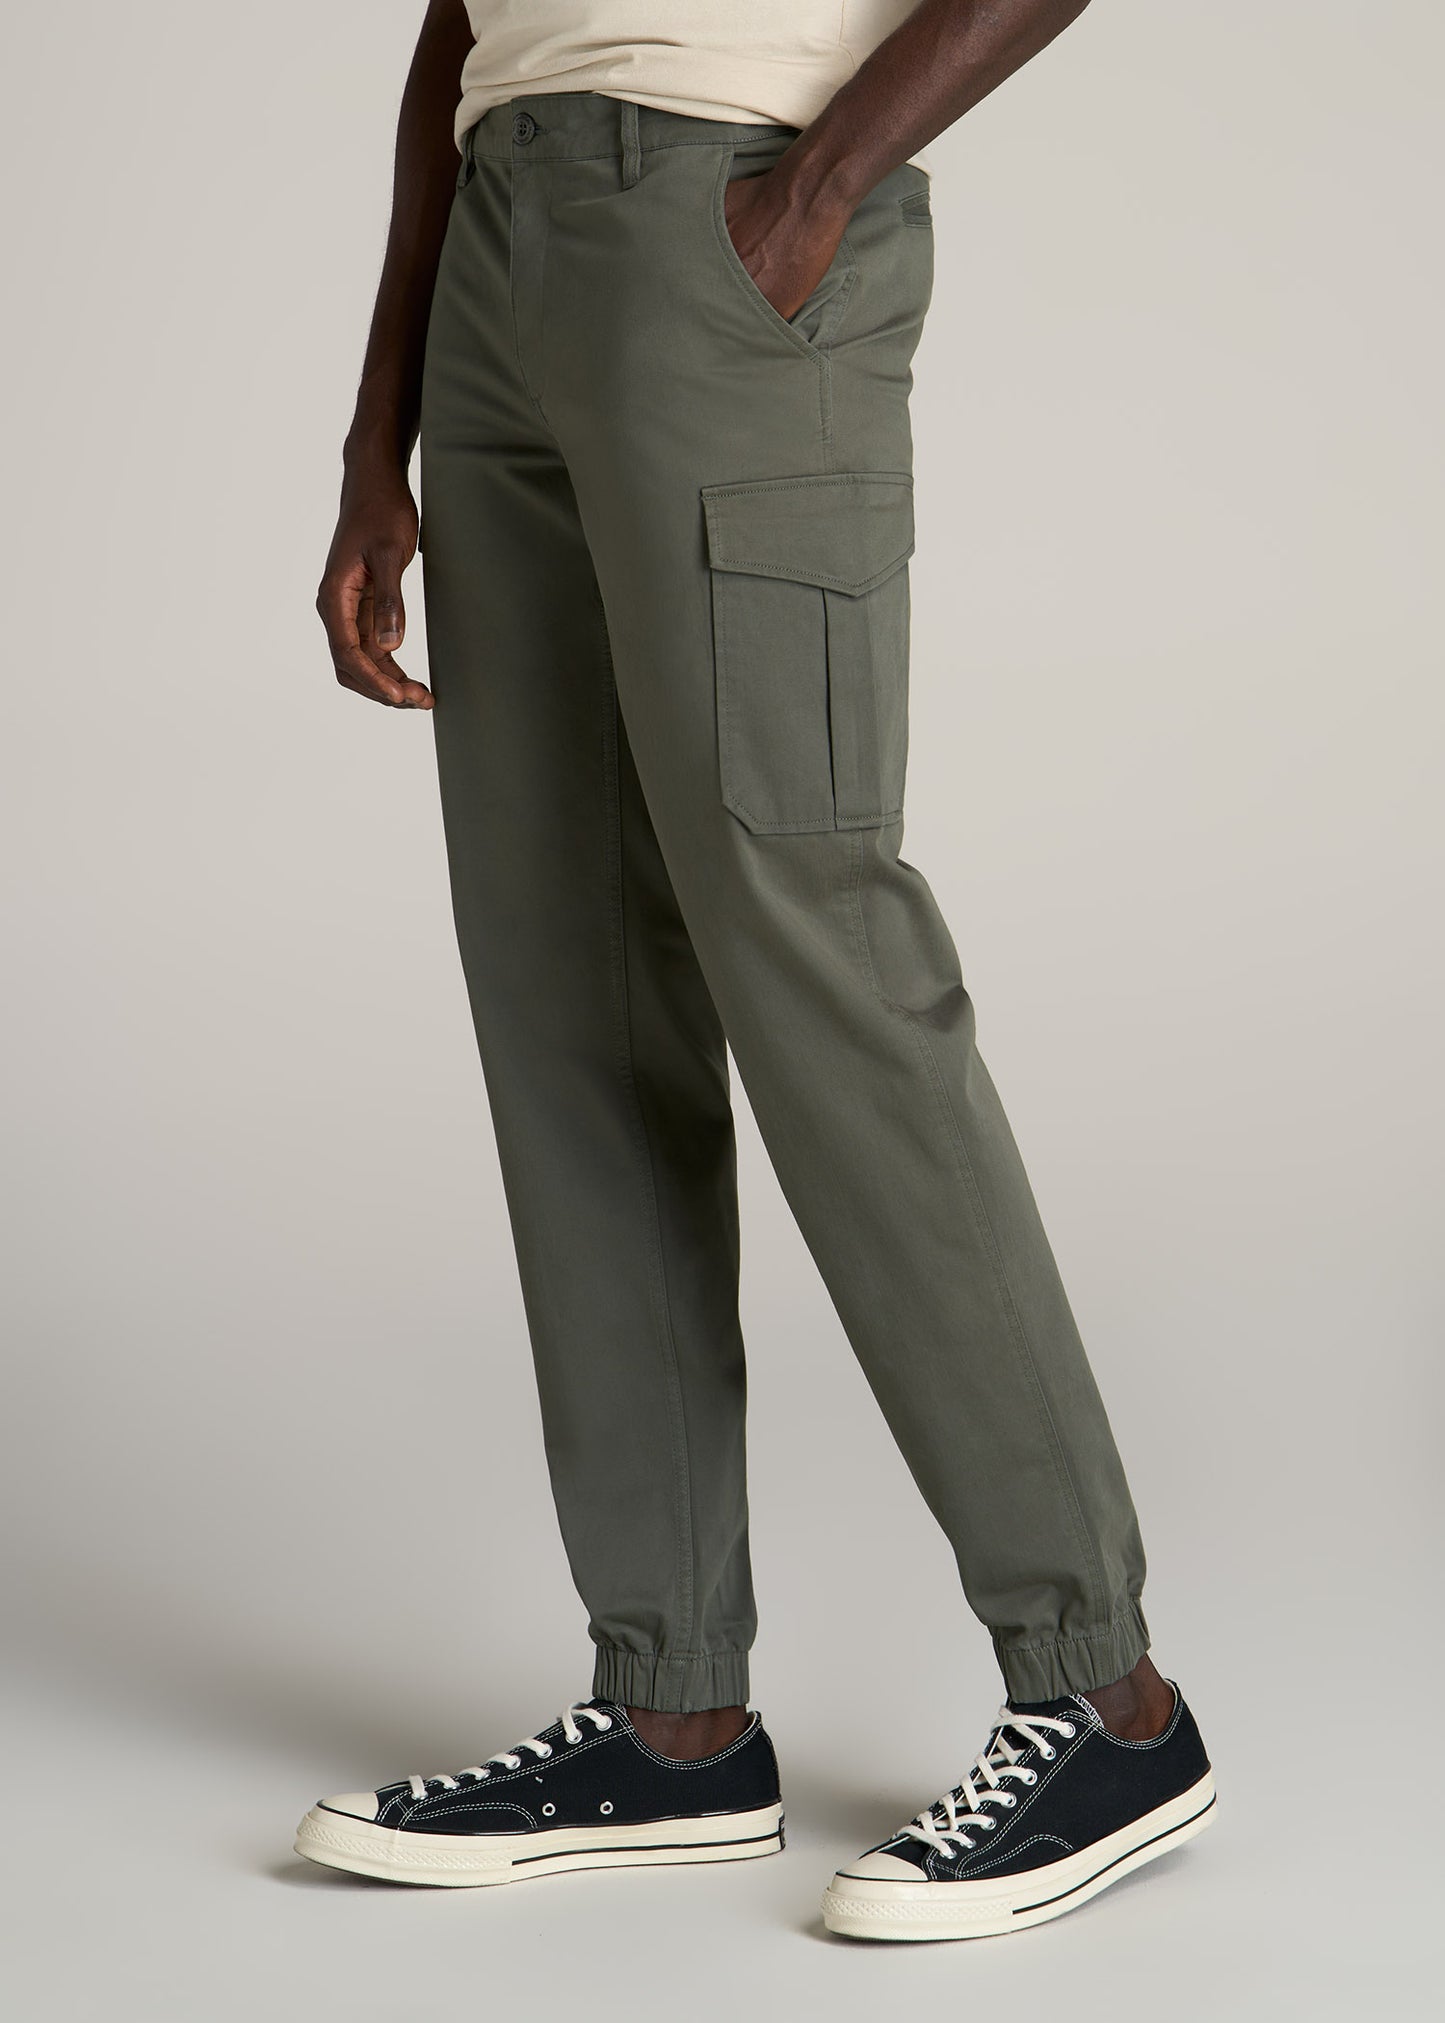 TAPERED-FIT Stretch Cotton Cargo Jogger Pants for Tall Men in Spring Olive